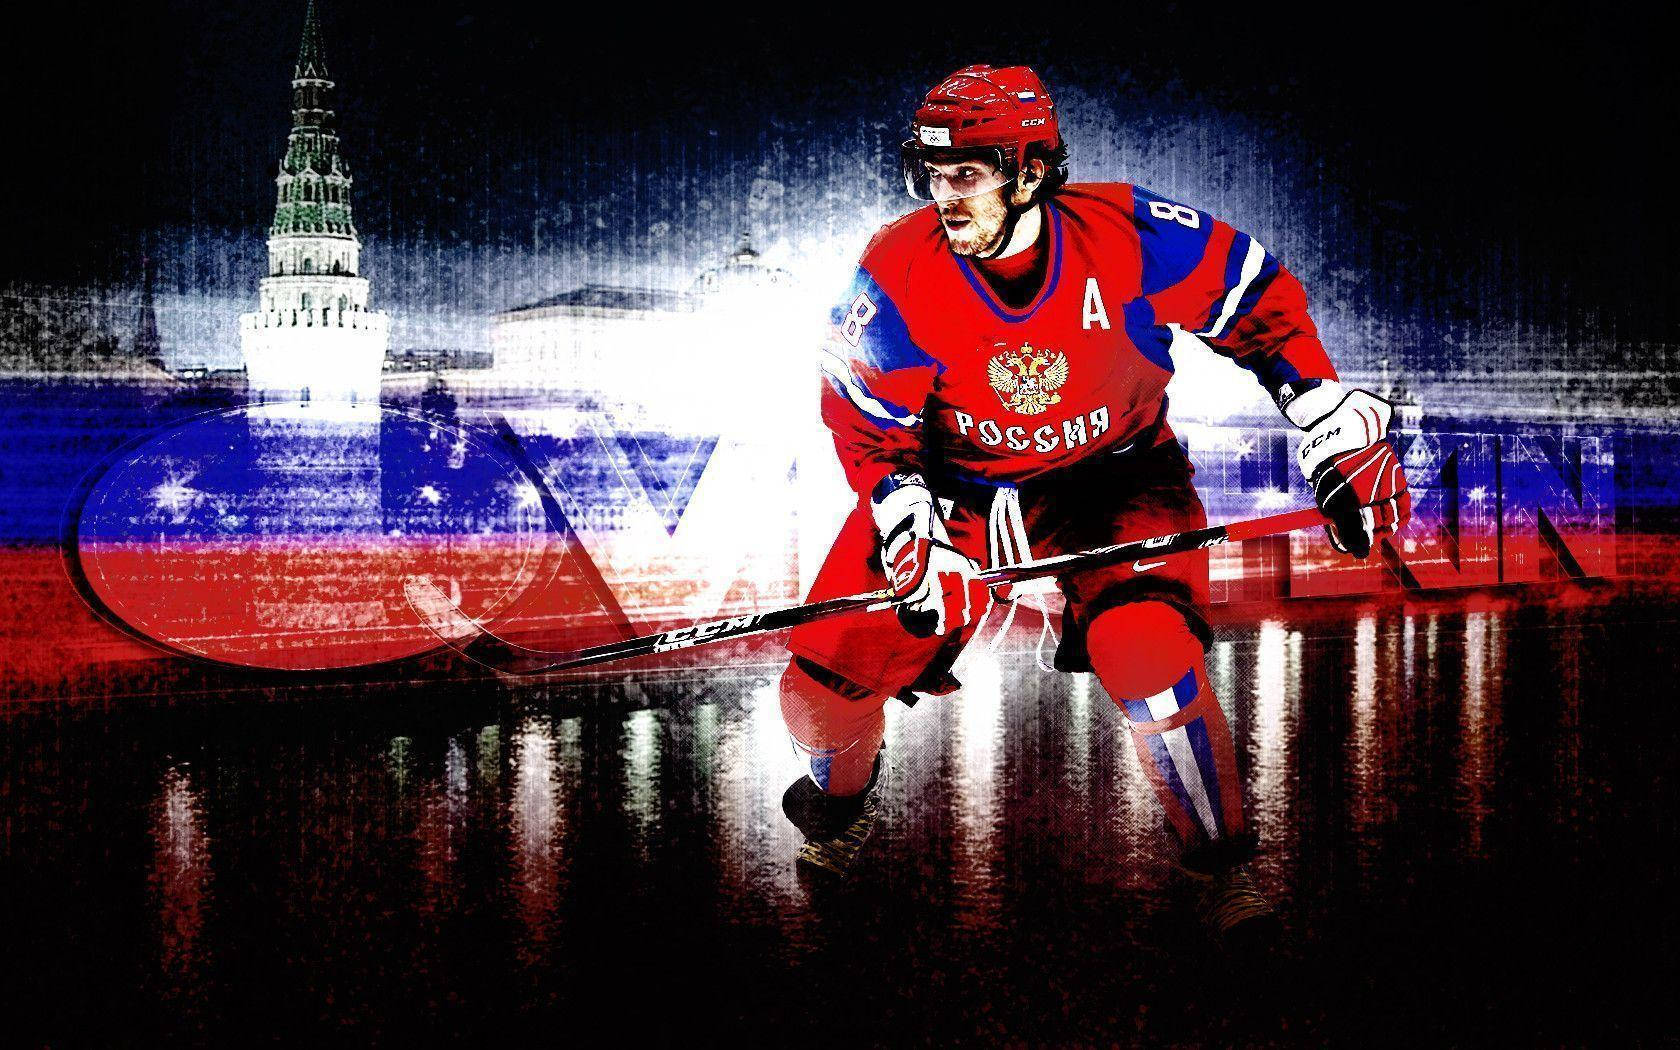 Alex Ovechkin Heroic Pose in Washington Capitals Jersey Against Cityscape Backdrop Wallpaper